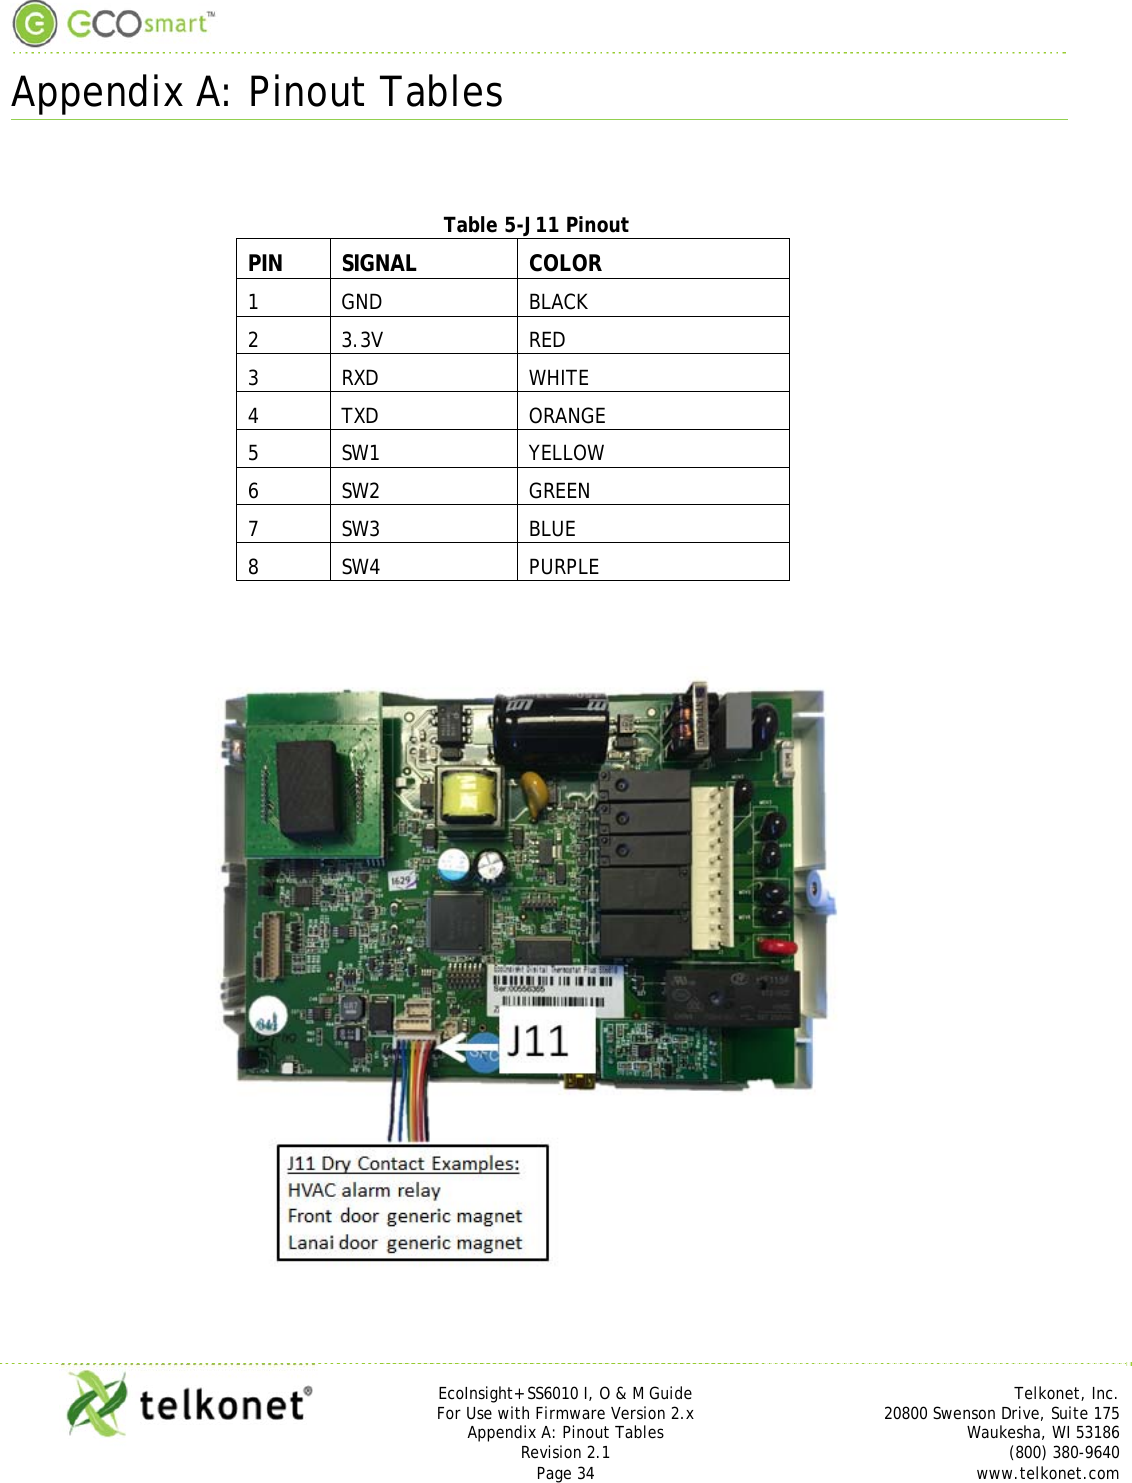  Appendix A: Pinout Tables     EcoInsight+ SS6010 I, O &amp; M Guide Telkonet, Inc. For Use with Firmware Version 2.x 20800 Swenson Drive, Suite 175 Appendix A: Pinout Tables Waukesha, WI 53186 Revision 2.1   (800) 380-9640 Page 34  www.telkonet.com   Table 5-J11 Pinout PIN SIGNAL  COLOR 1 GND  BLACK 2 3.3V  RED 3 RXD  WHITE 4 TXD  ORANGE 5 SW1  YELLOW 6 SW2  GREEN 7 SW3  BLUE 8 SW4  PURPLE      